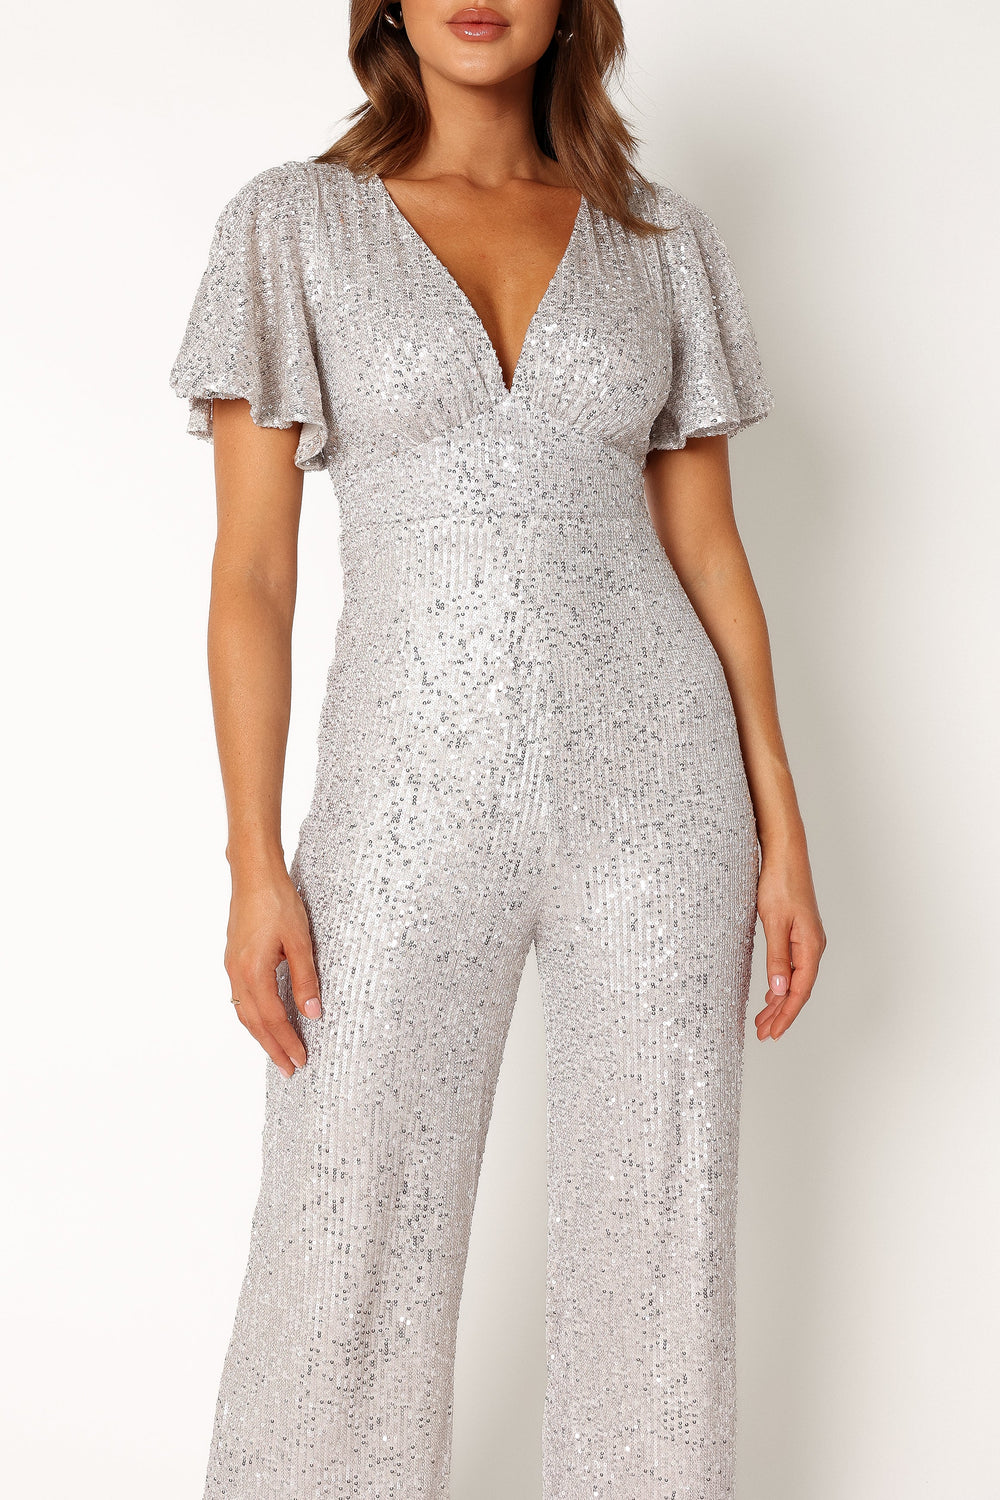 Petal and Pup USA Rompers Kiran Jumpsuit - Silver